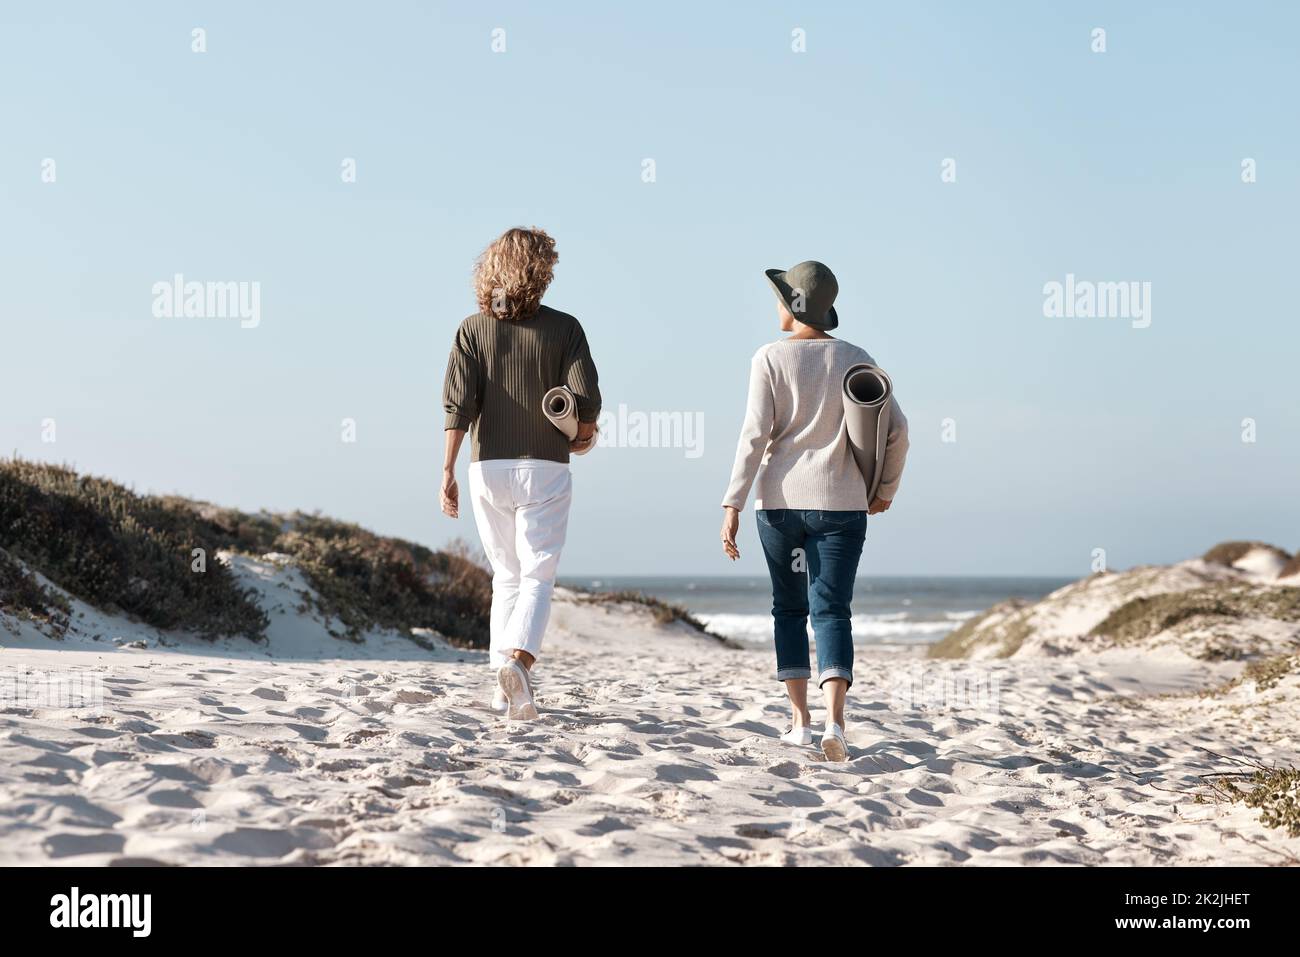 Heading out to find the perfect spot. Rearview shot of two unrecognizable woman walking with their mats on the beach. Stock Photo